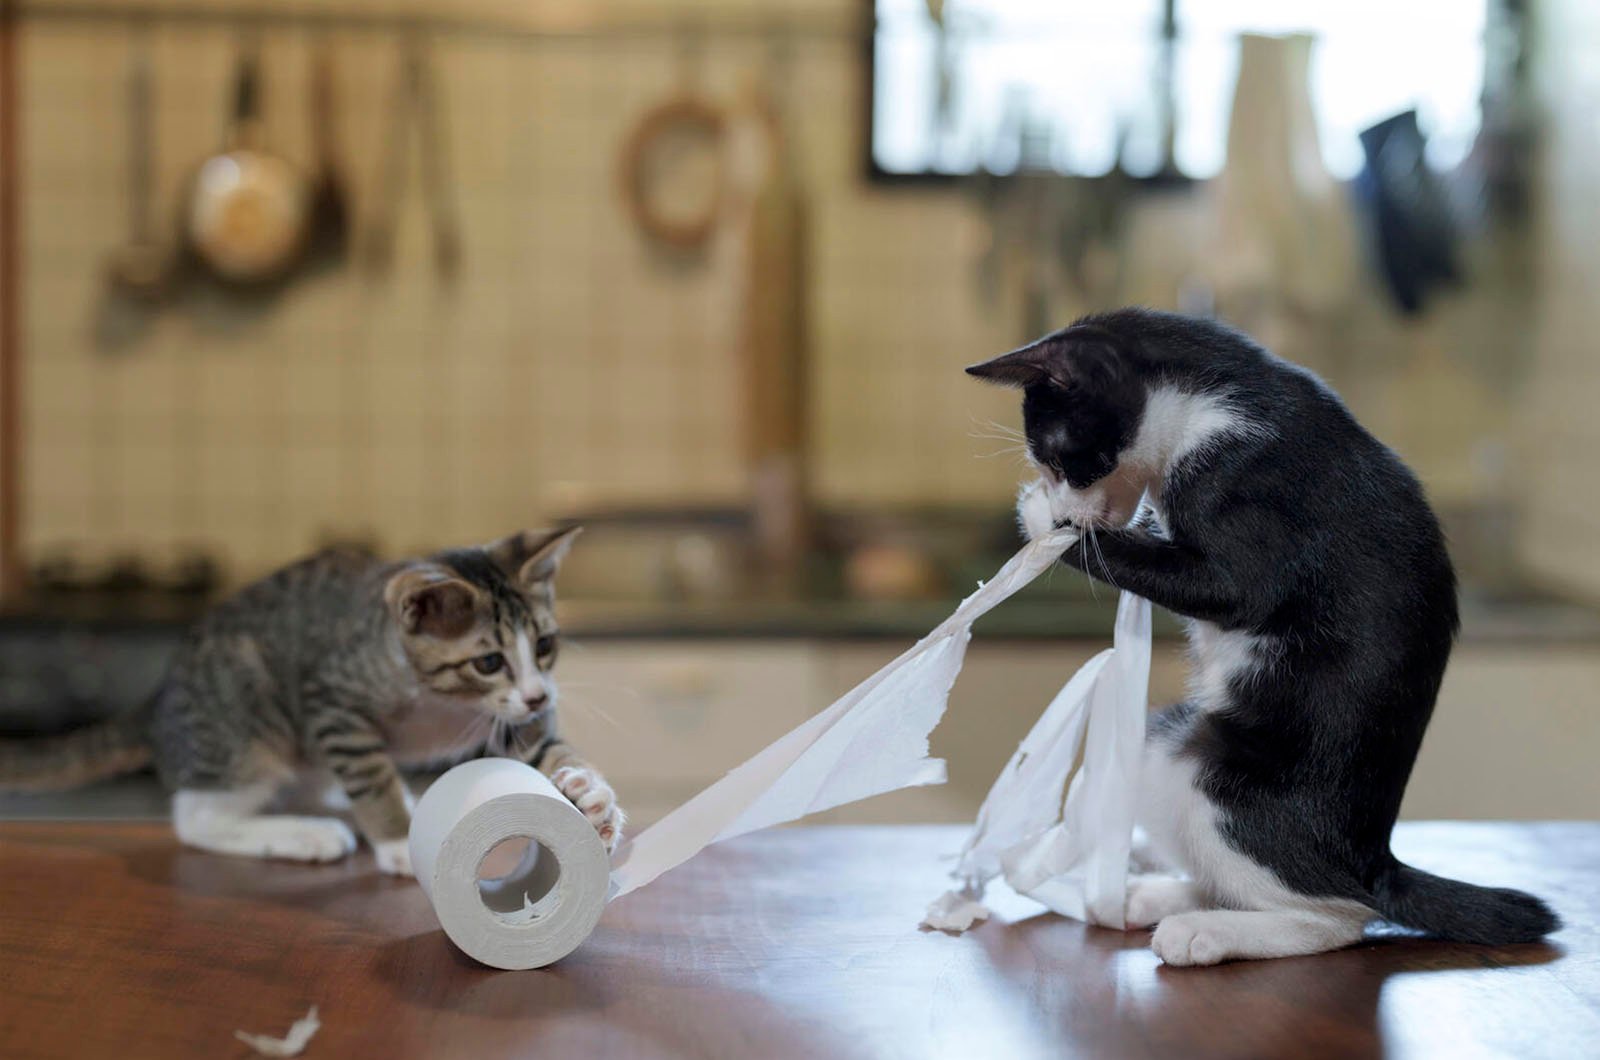 Two kittens playing with a roll of toilet paper on a kitchen counter, with one kitten unrolling it and the other observing.